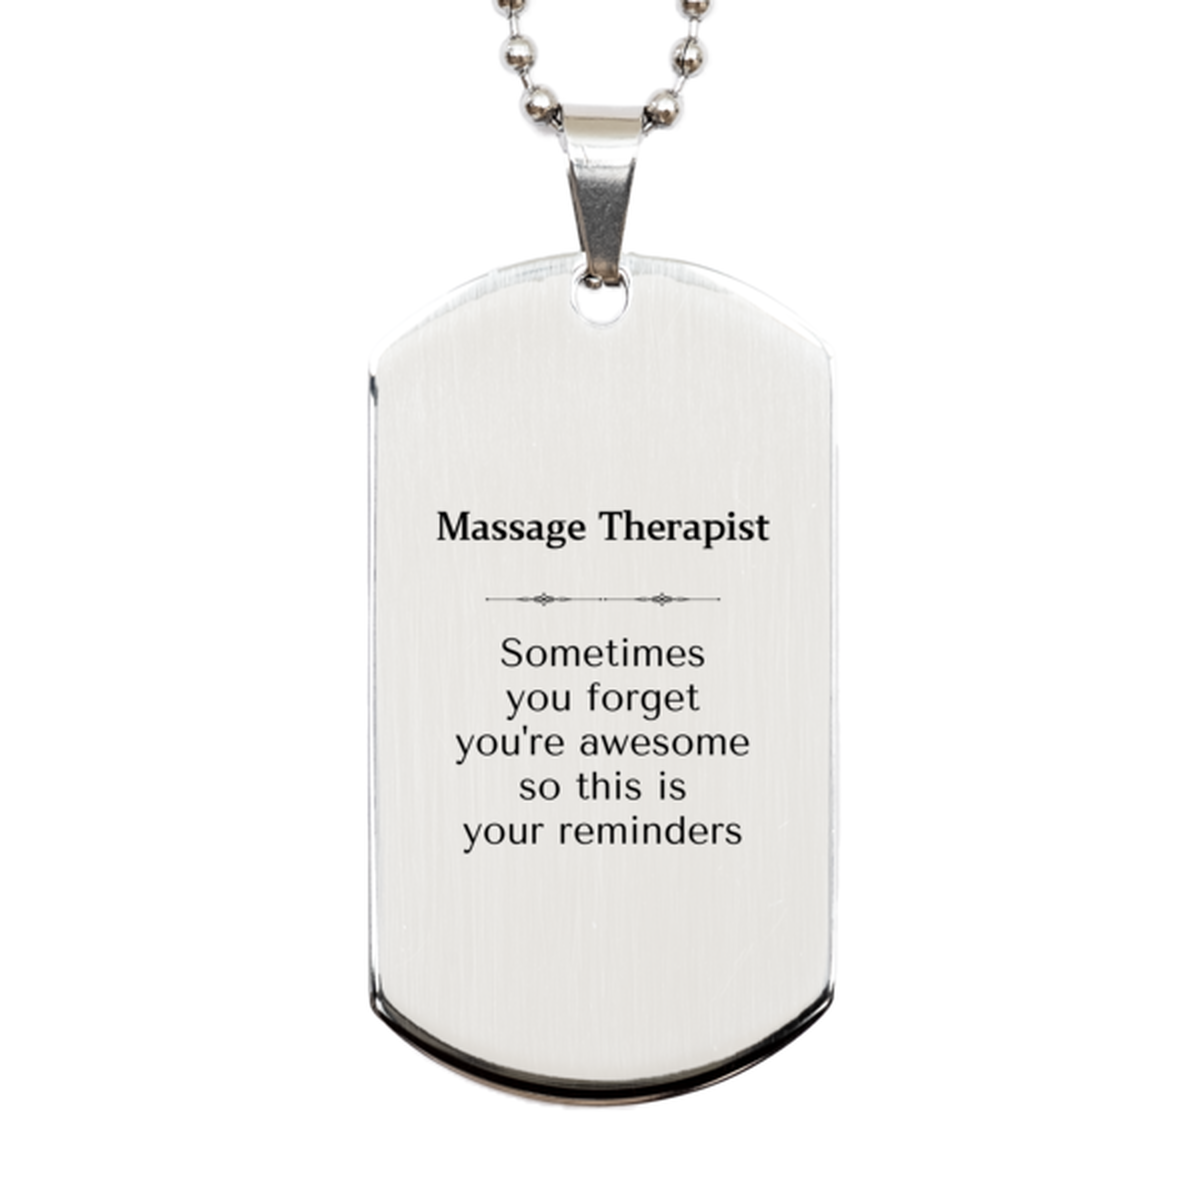 Sentimental Massage Therapist Silver Dog Tag, Massage Therapist Sometimes you forget you're awesome so this is your reminders, Graduation Christmas Birthday Gifts for Massage Therapist, Men, Women, Coworkers